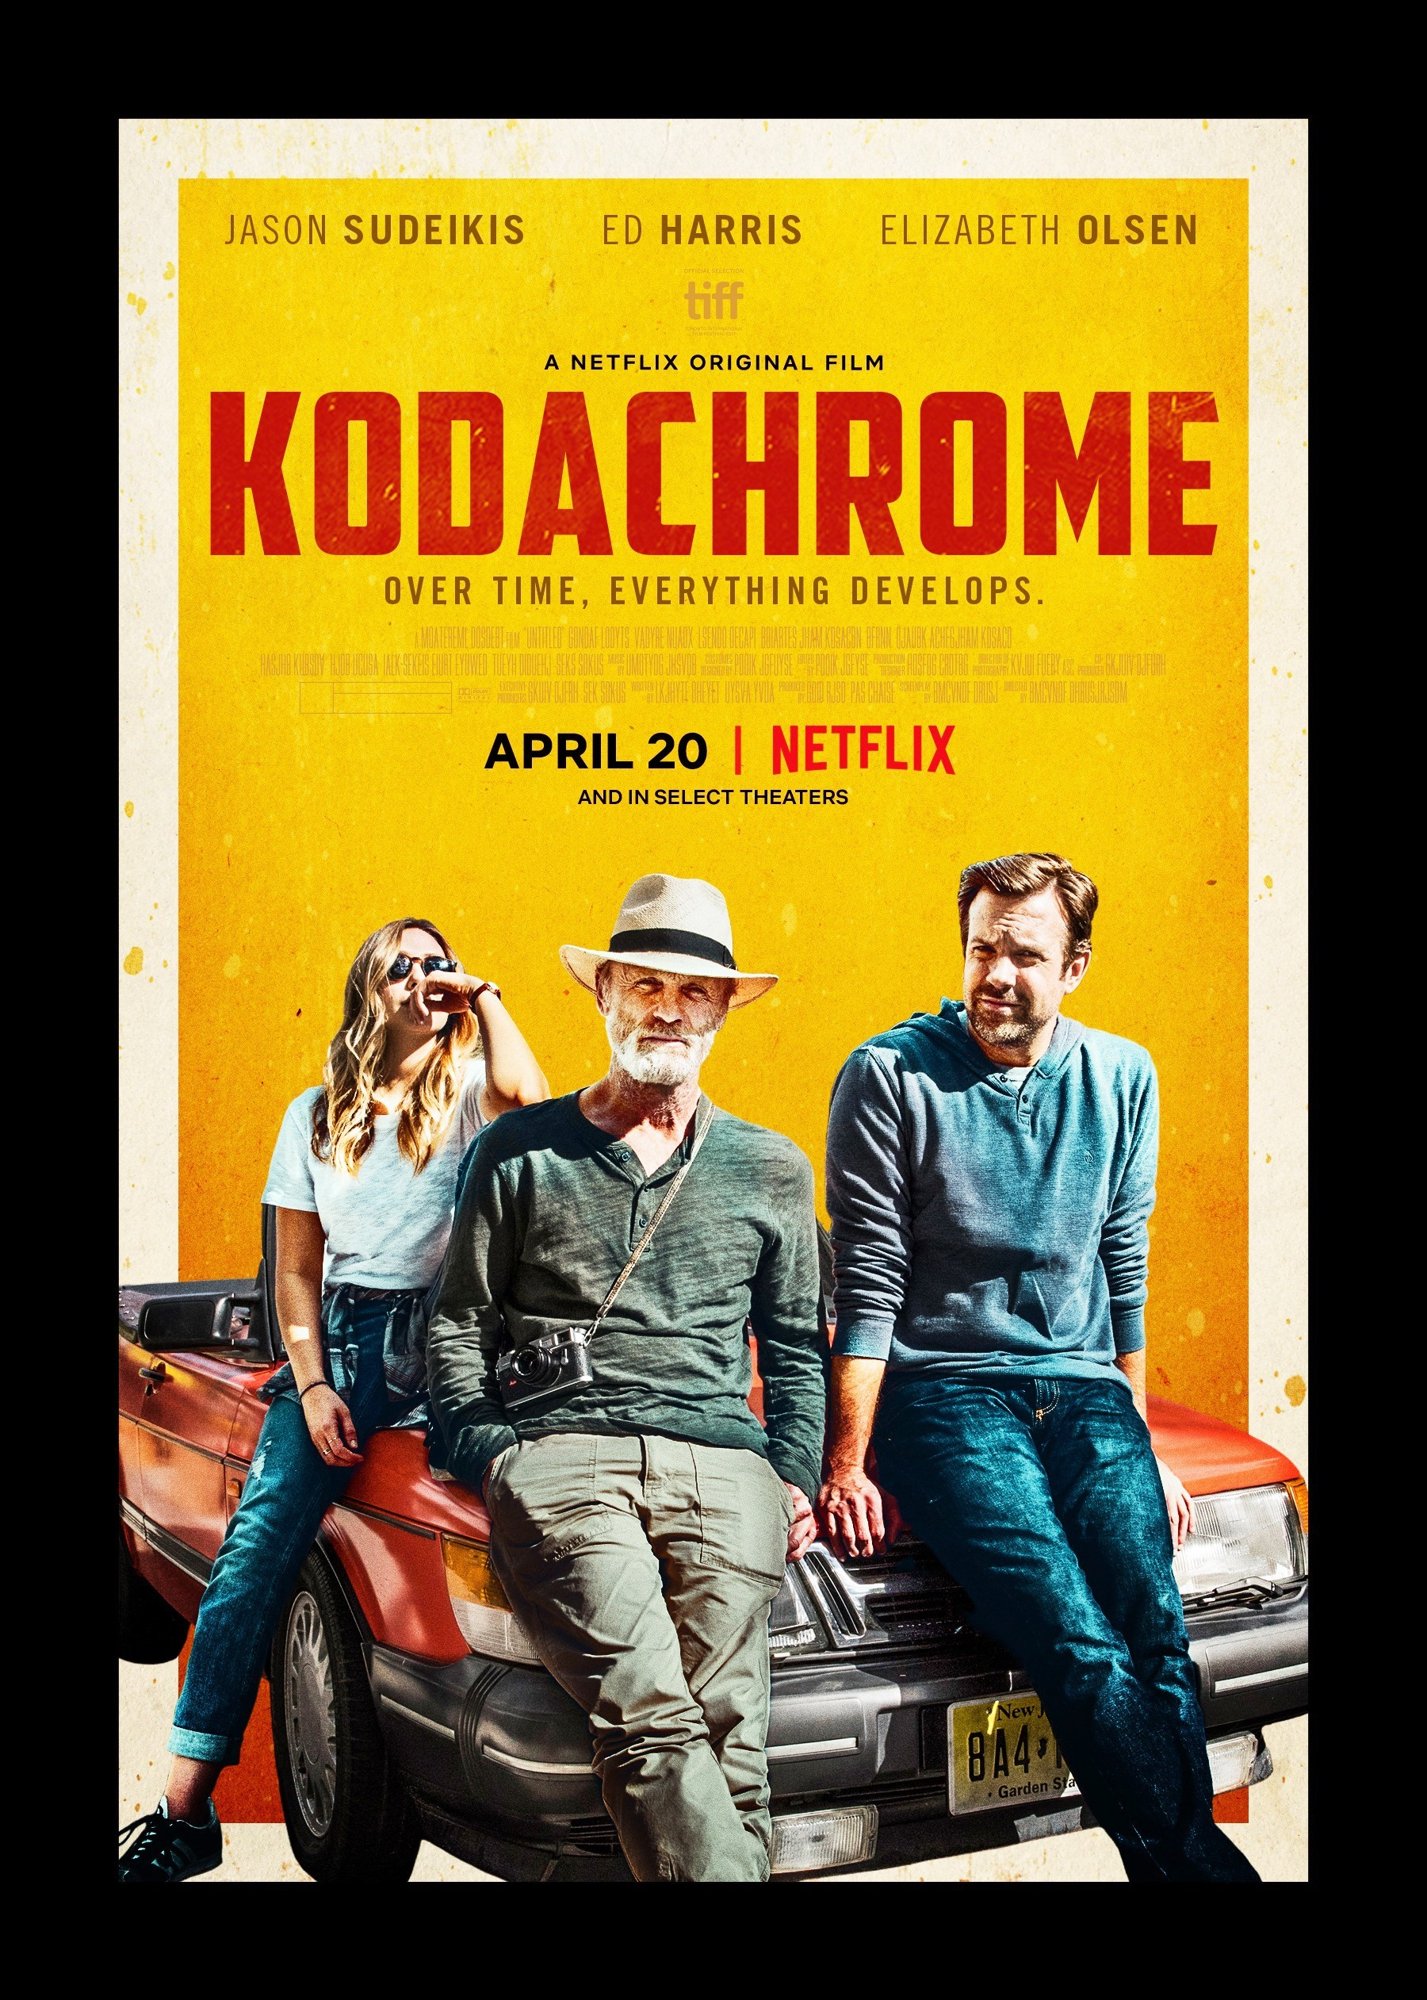 Kodachrome (2018) Pictures, Photo, Image and Movie Stills